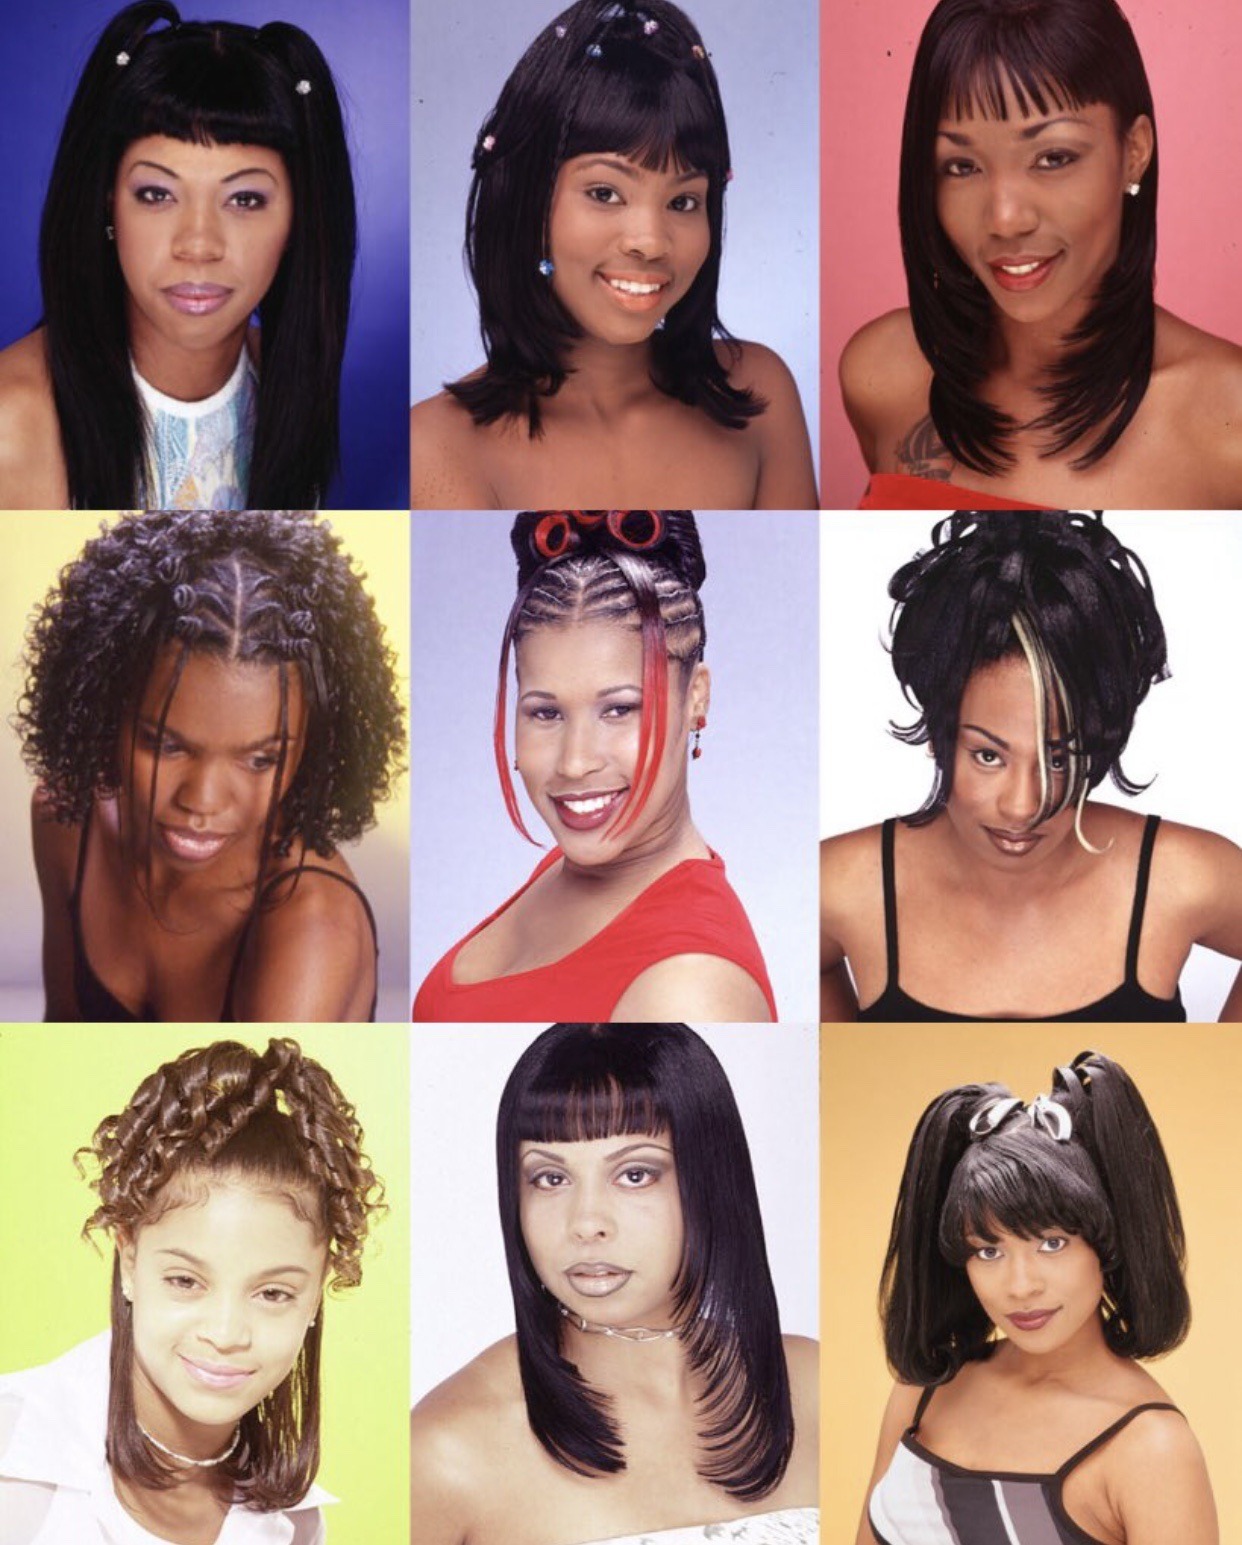 A Nostalgic Look at 90s Hairstyles on TV